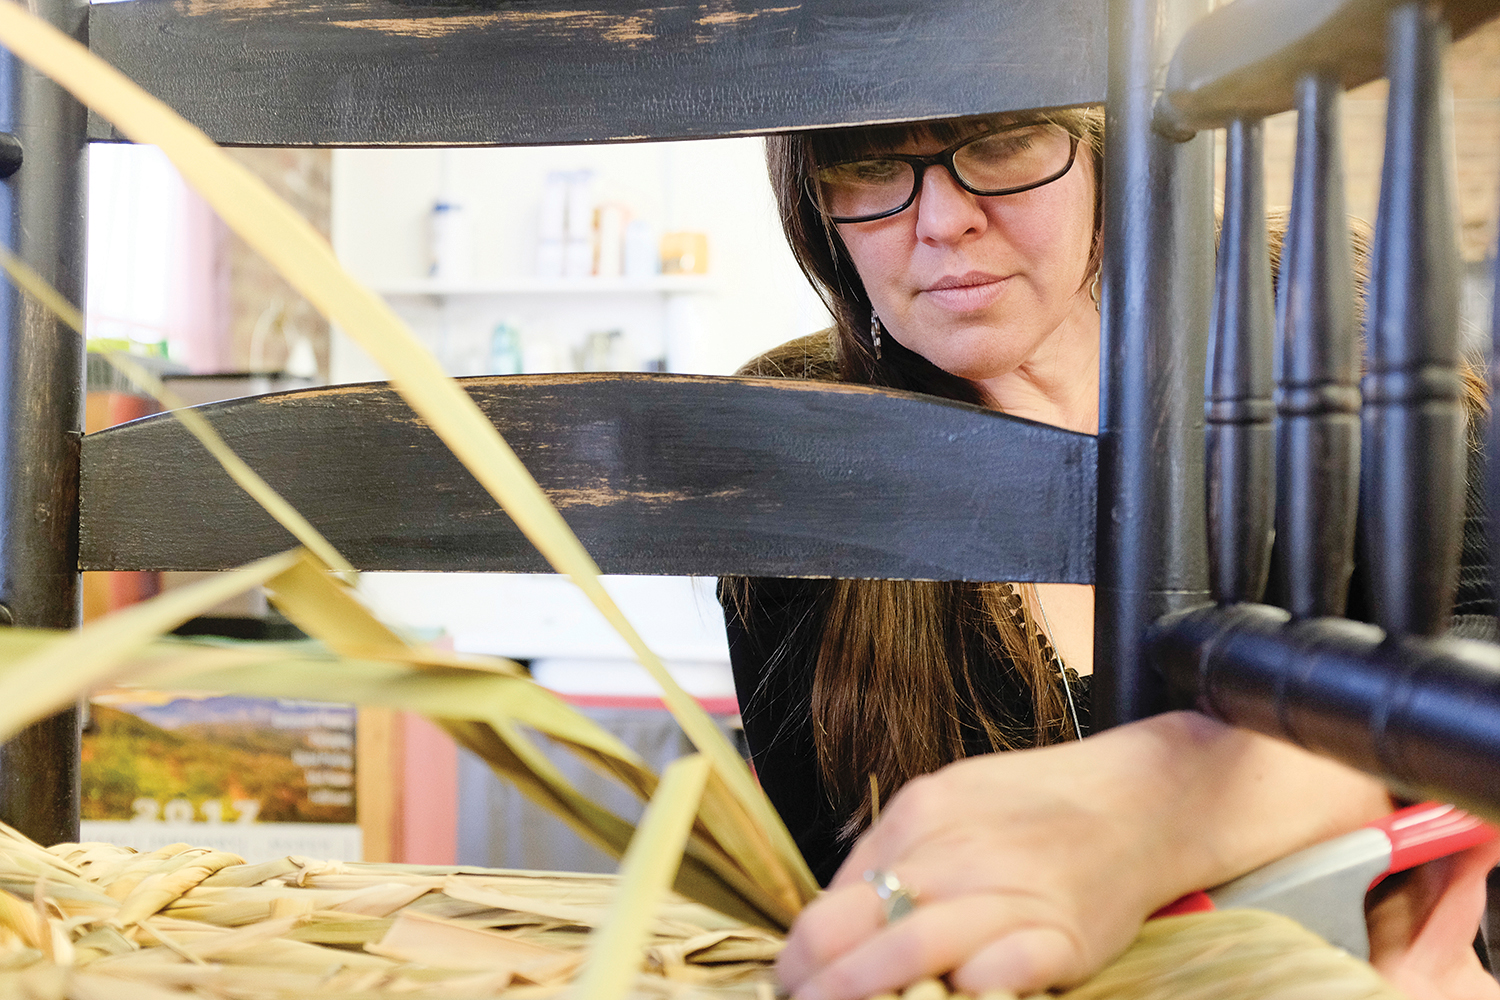 “Chair caning can’t be learned in an hour, as HGTV might lead you to believe,” warns Brandy Clements. Photo by Matt Rose